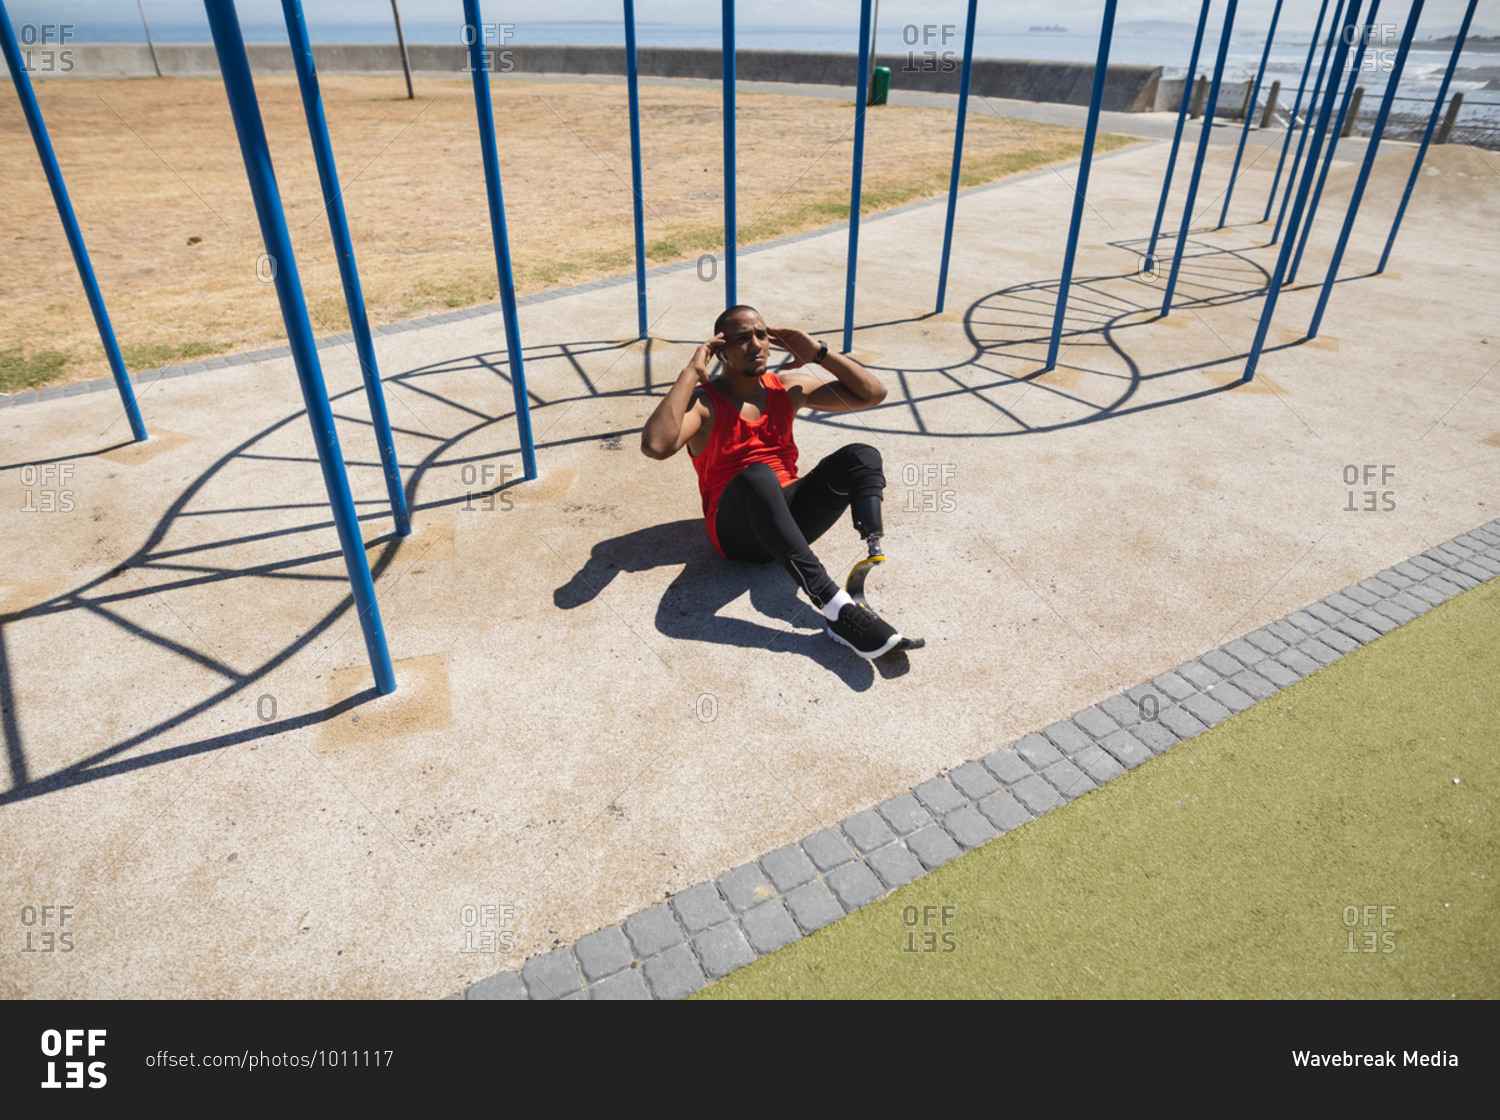 Disabled mixed race man with a prosthetic leg and running blade exercising at an outdoor gym by the coast, doing sit ups in the sun beside the gym equipment. Fitness disability healthy lifestyle.